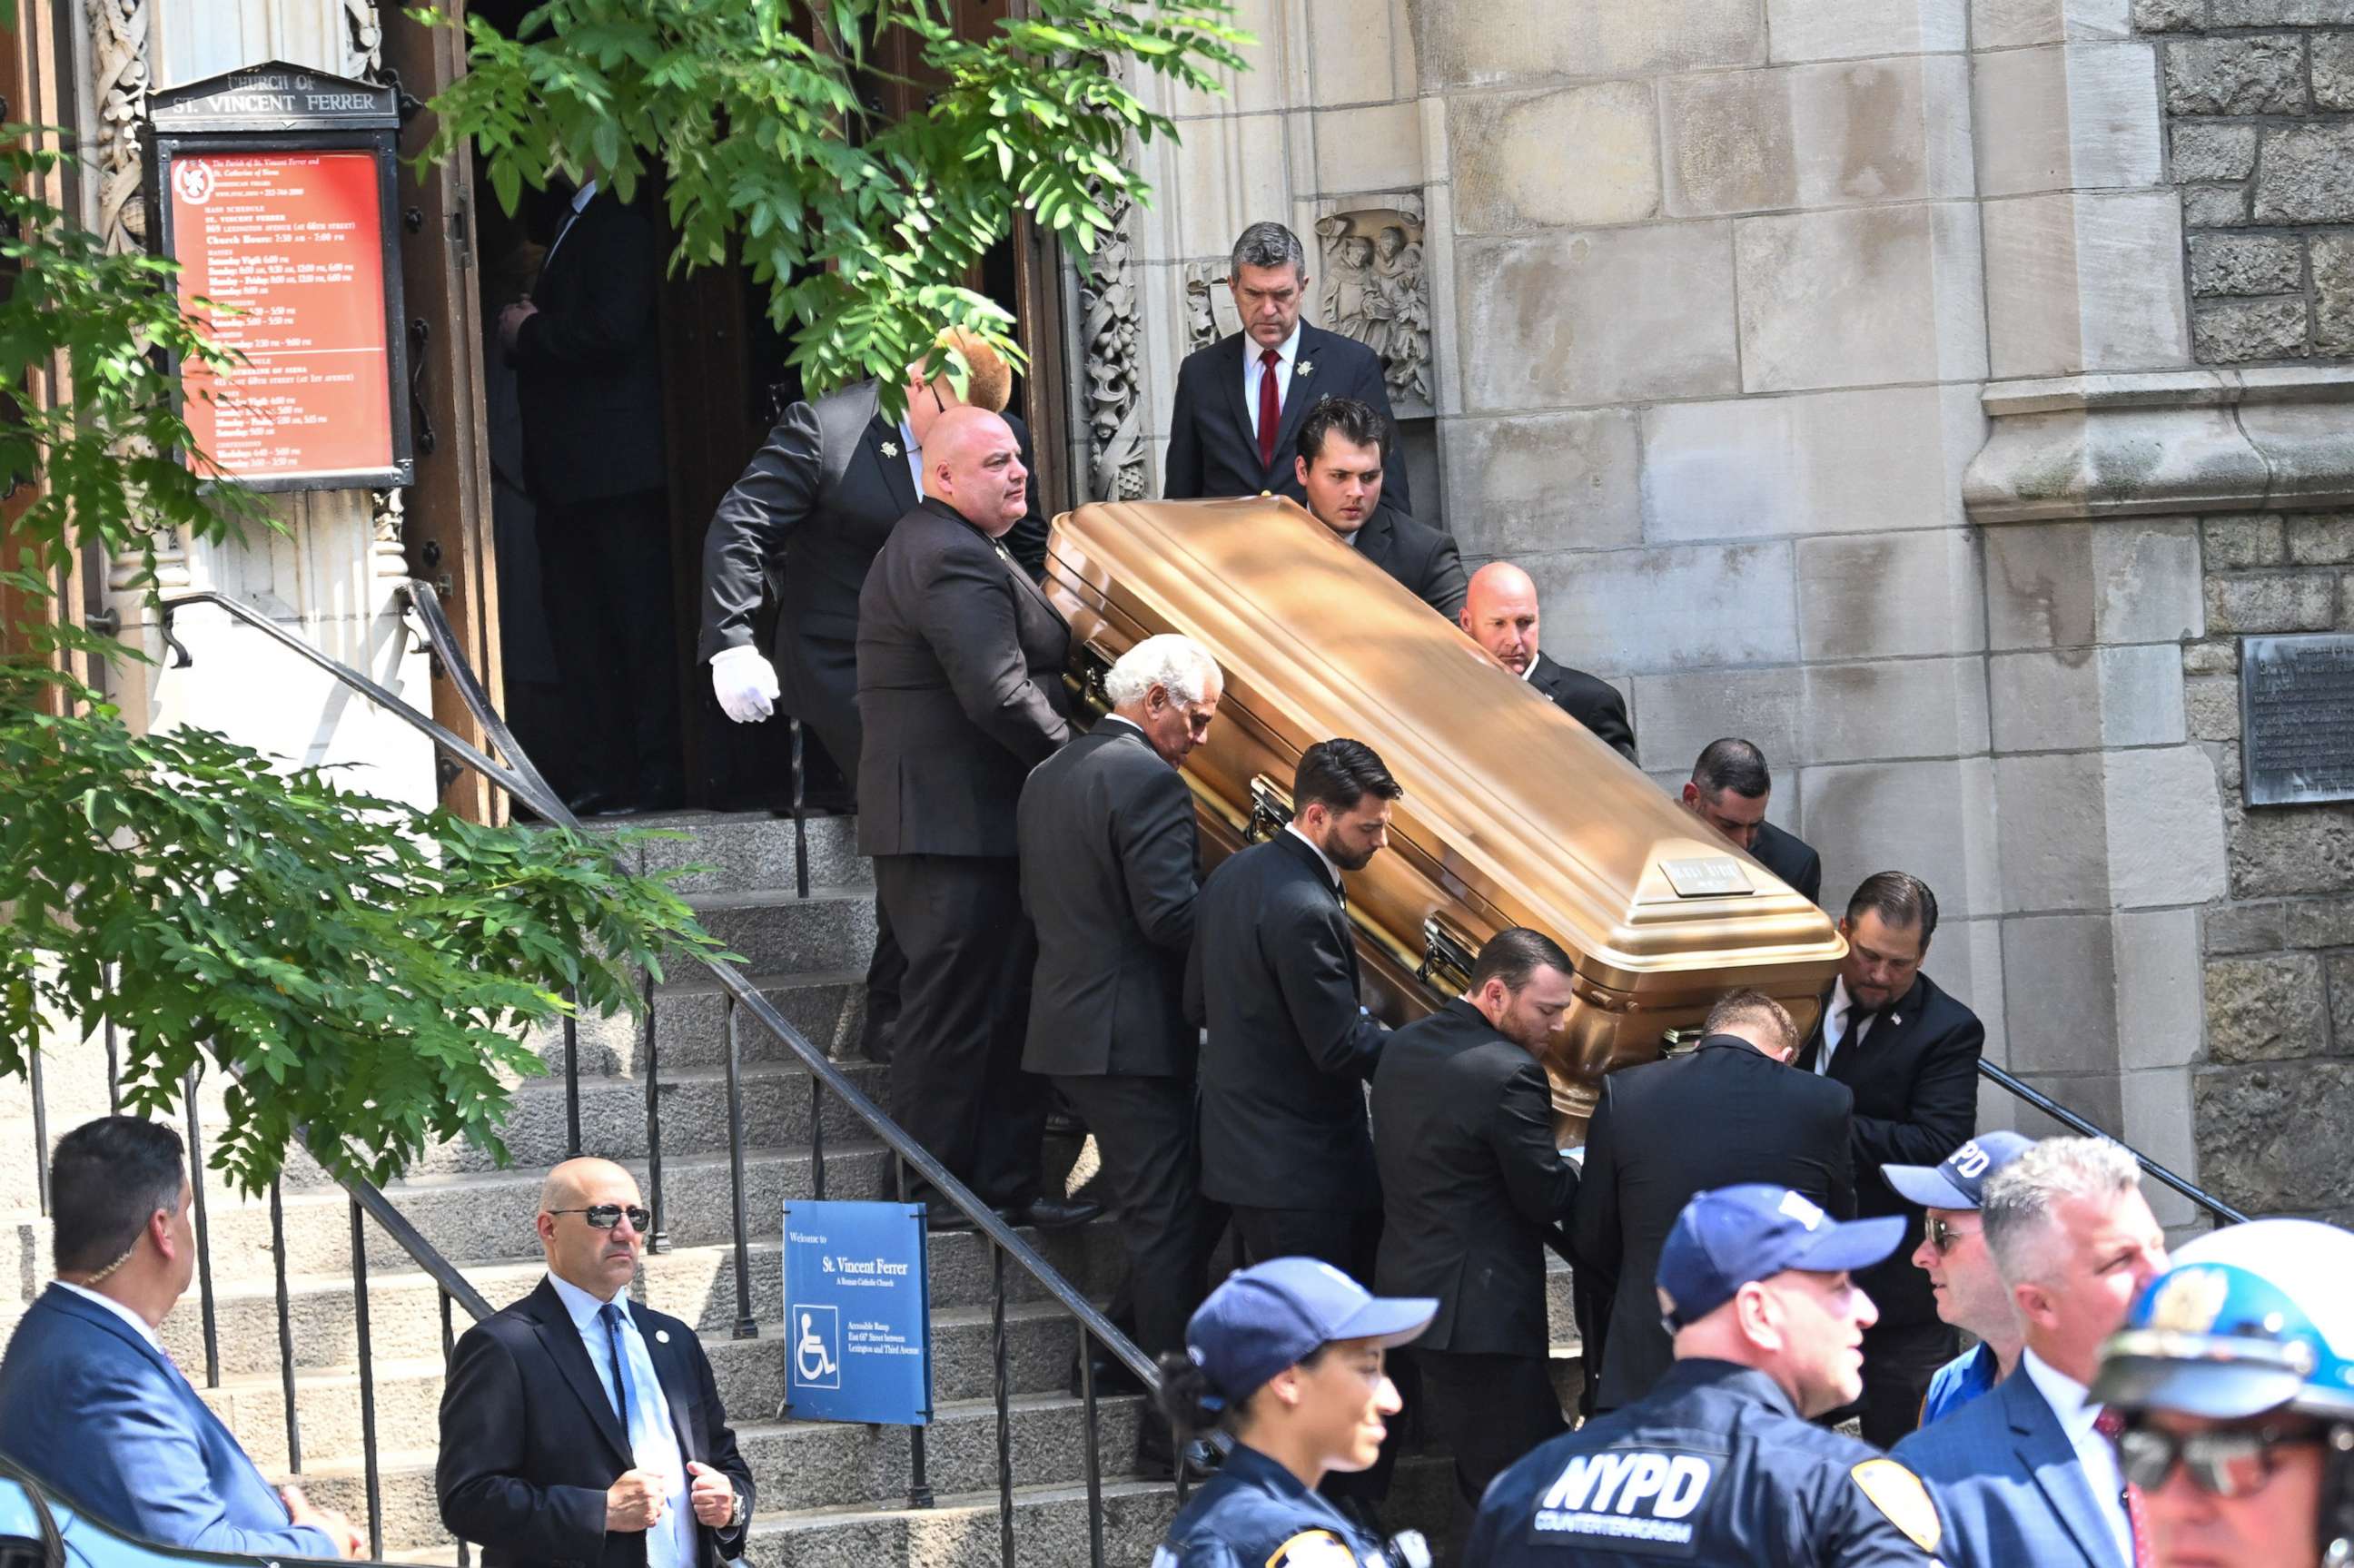 PHOTO: The casket of Ivana Trump is brought out of St. Vincent Ferrer Roman Catholic Church after her funeral in New York July 20, 2022.